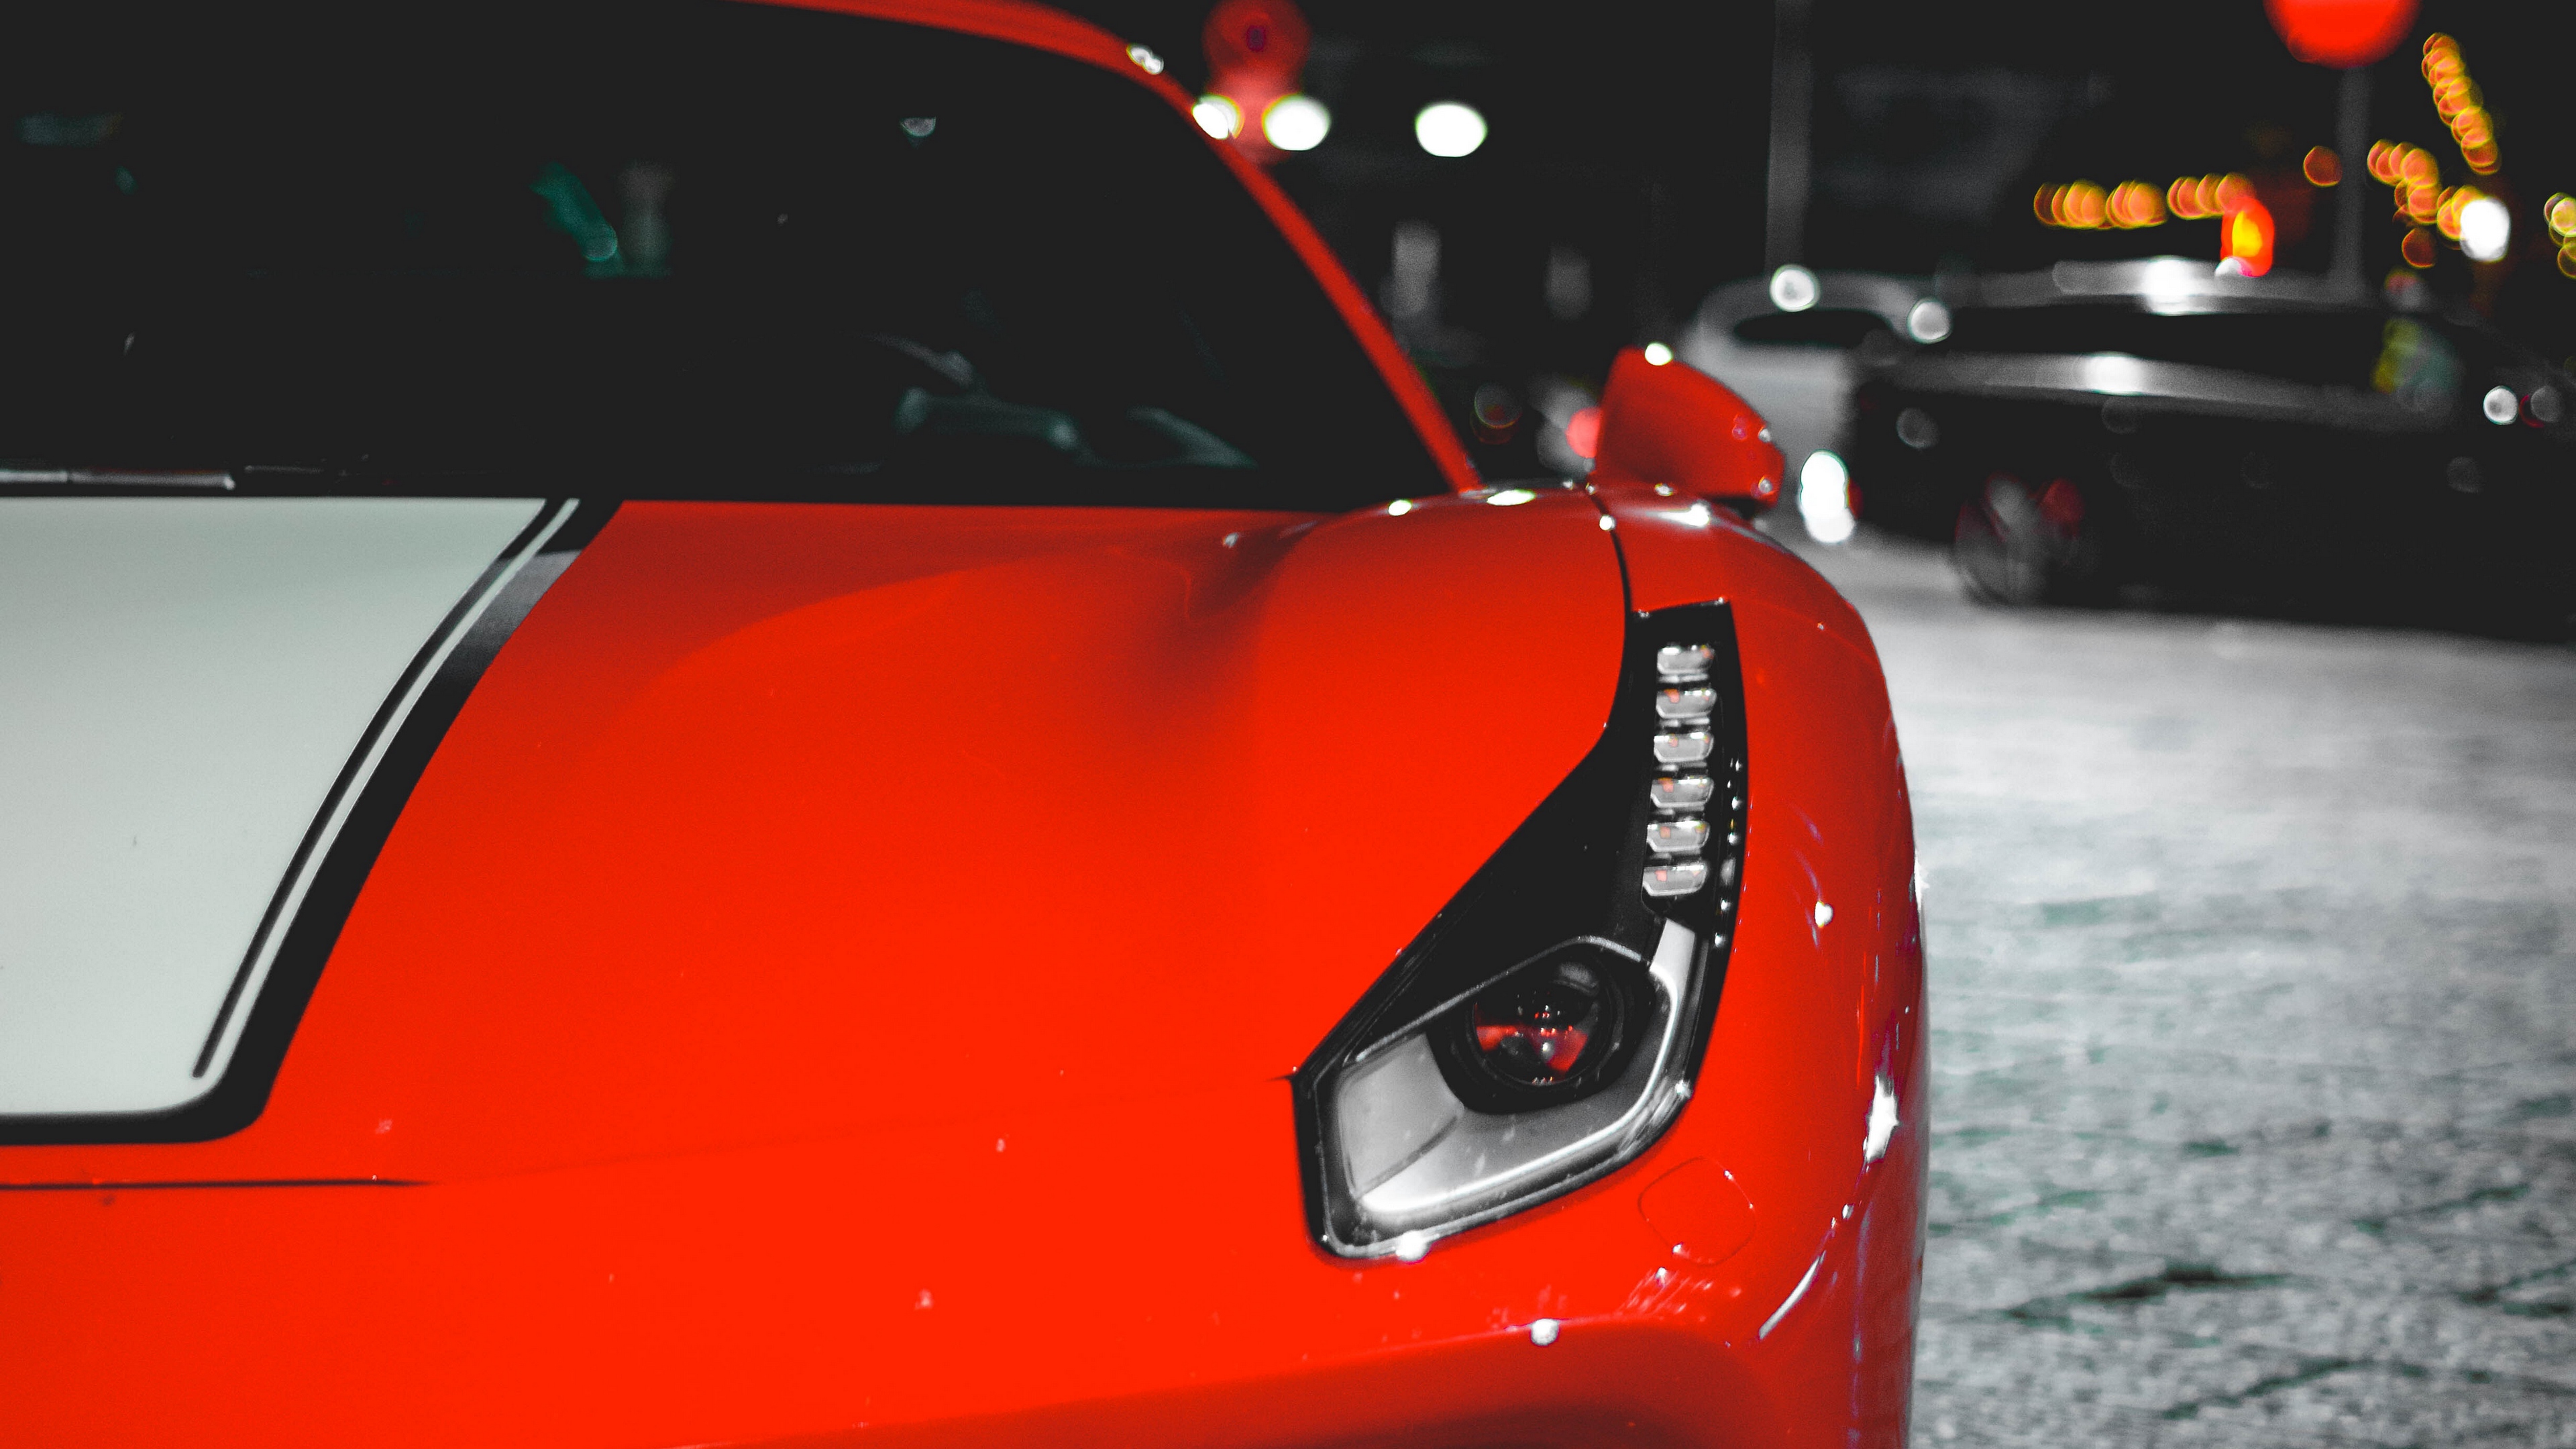 Wallpaper Auto, Front View, Red, Sport Car - Car Wallpaper 4k For Android , HD Wallpaper & Backgrounds